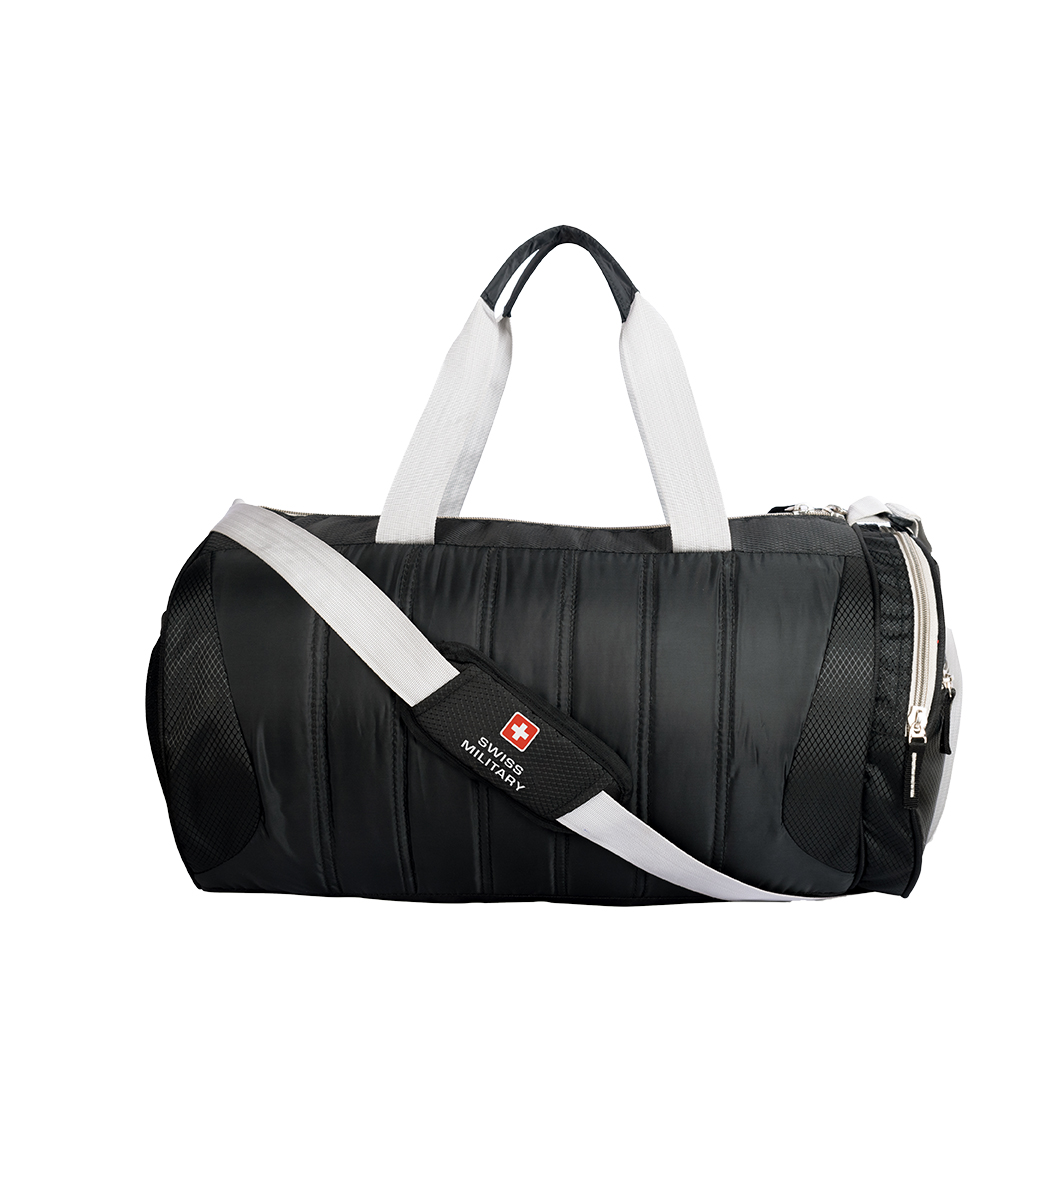 Cool Indian Gym Duffel Bag for Fitness || Gym Bag Black || Sports and  Travel Bag